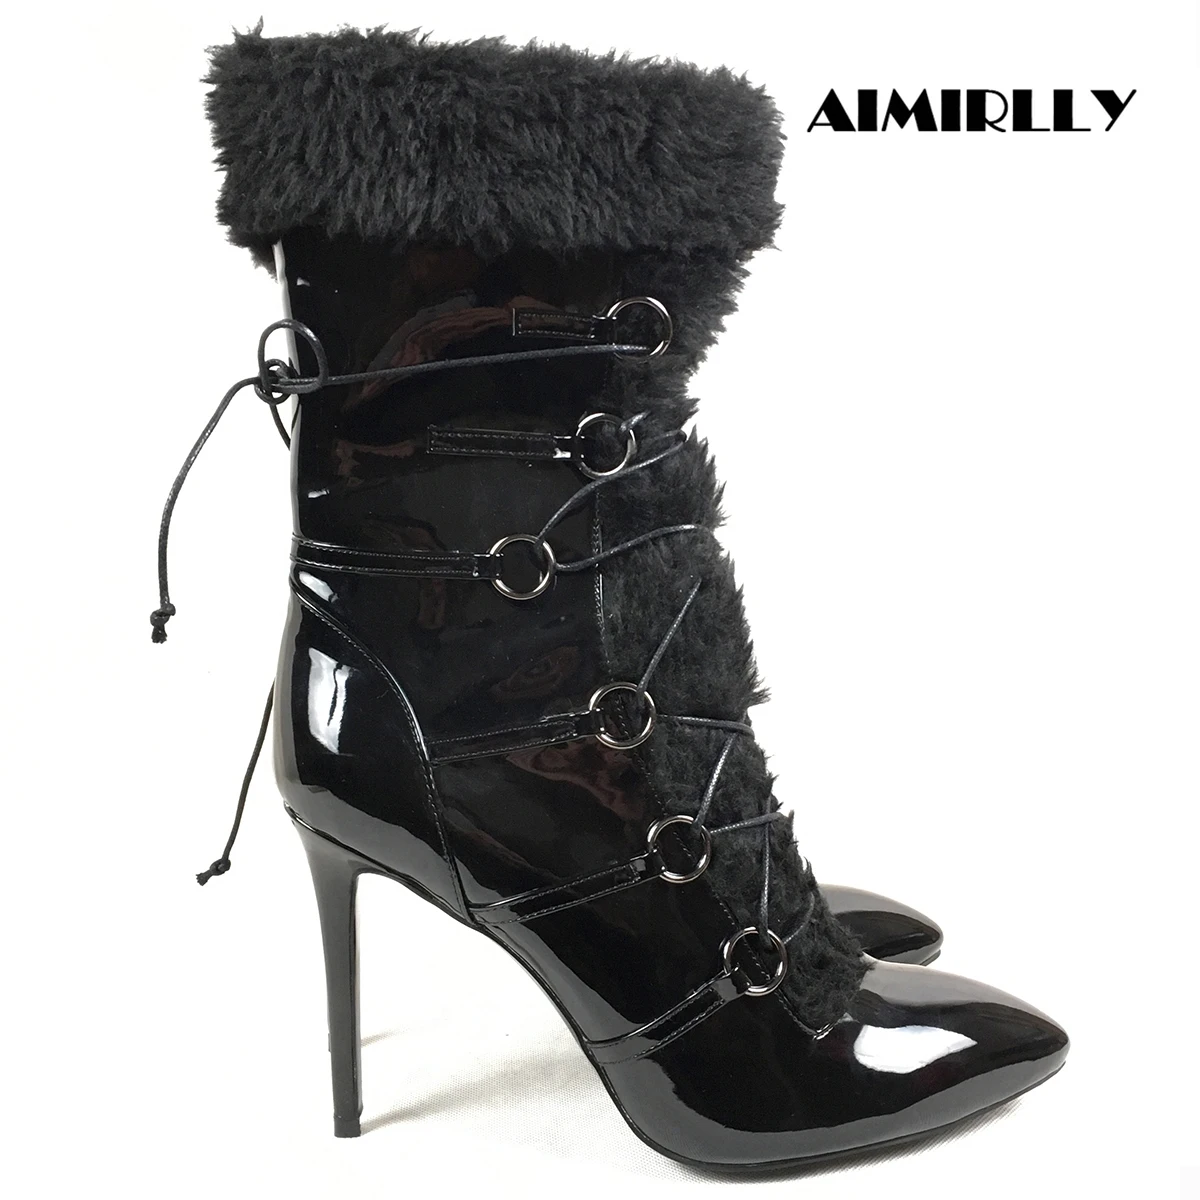 Women's Patent Synthetic Leather Pointed Shoes High-Heeled Zip Up Mid Calf Boots 